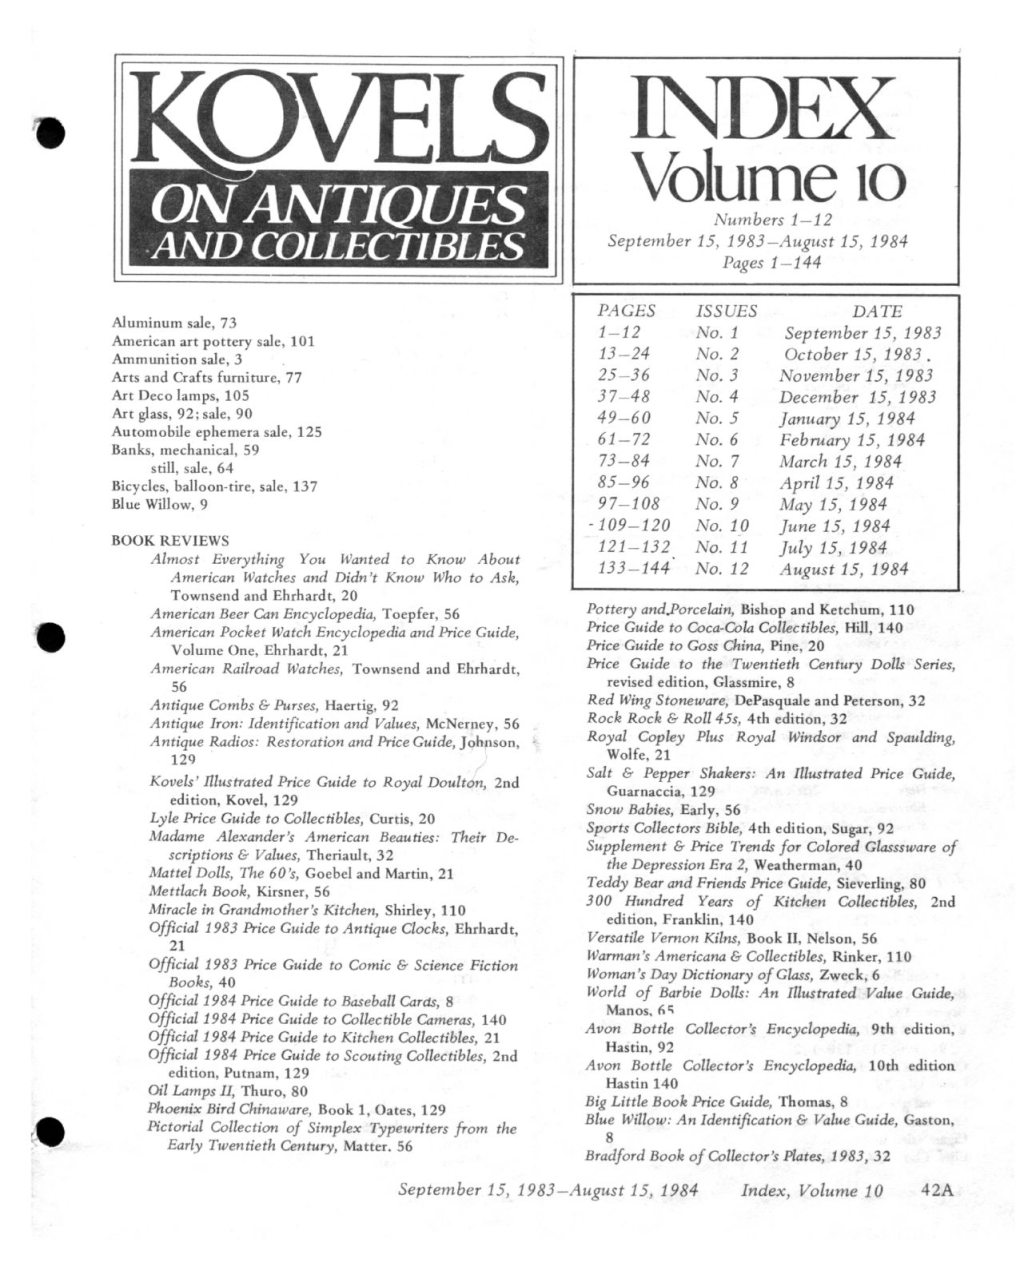 Annual Index September 1983-August 1984 Vol. 10